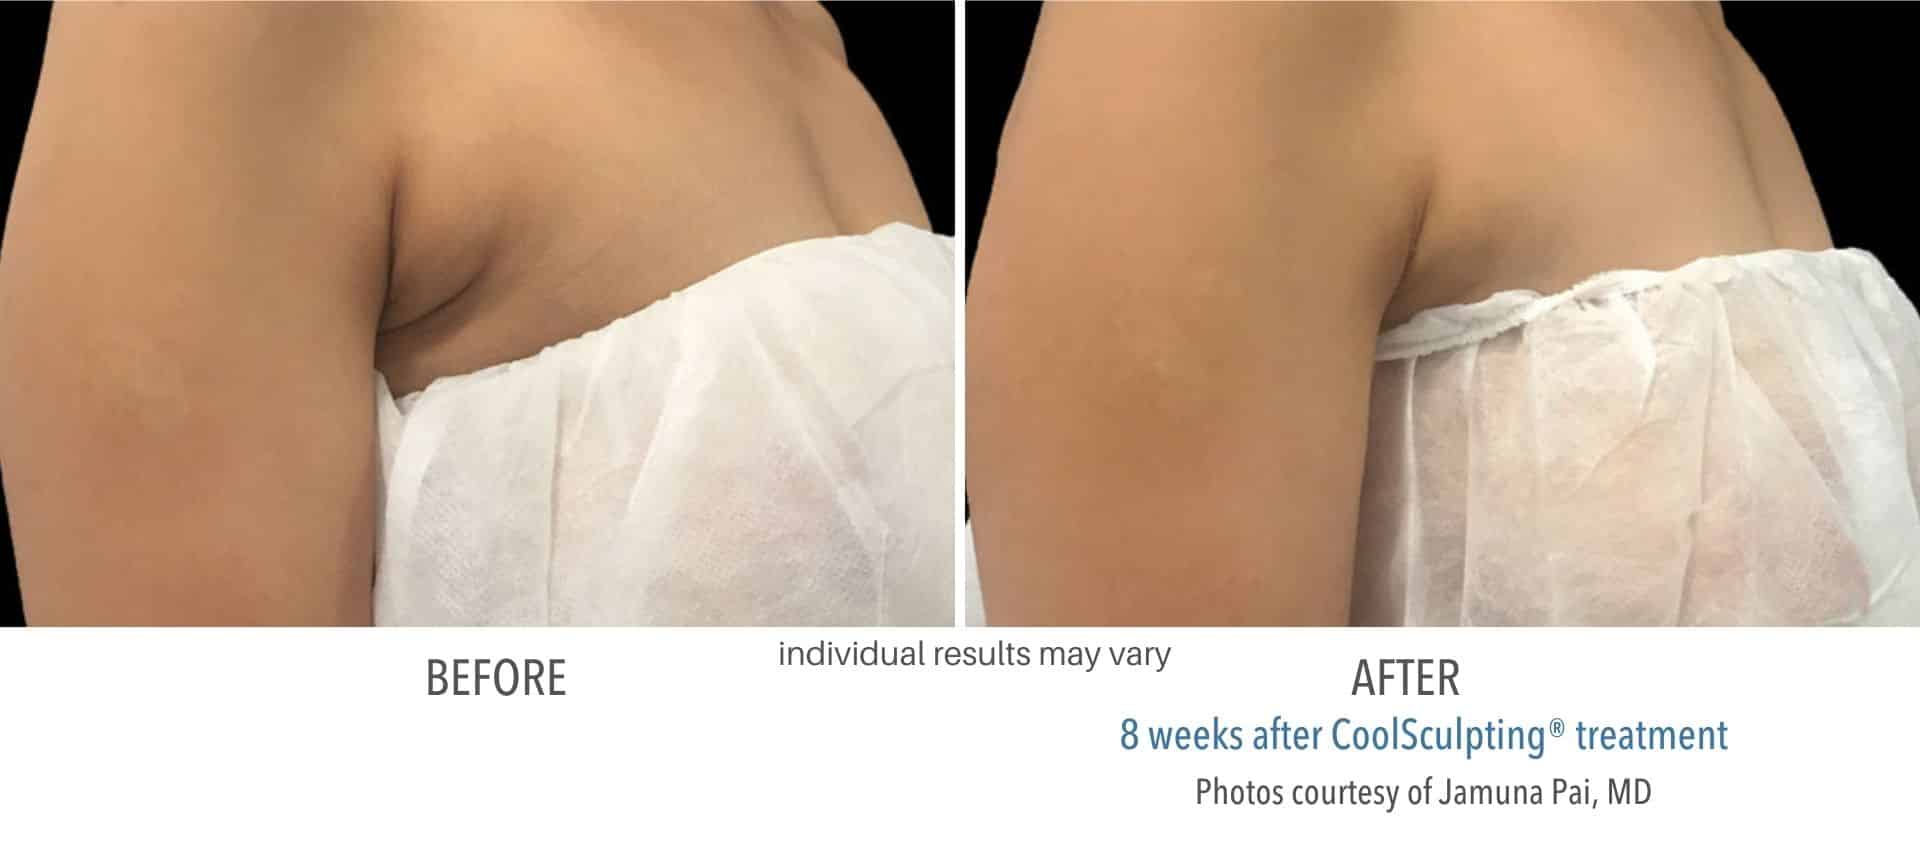 Coolsculpting bra fat before and after results.